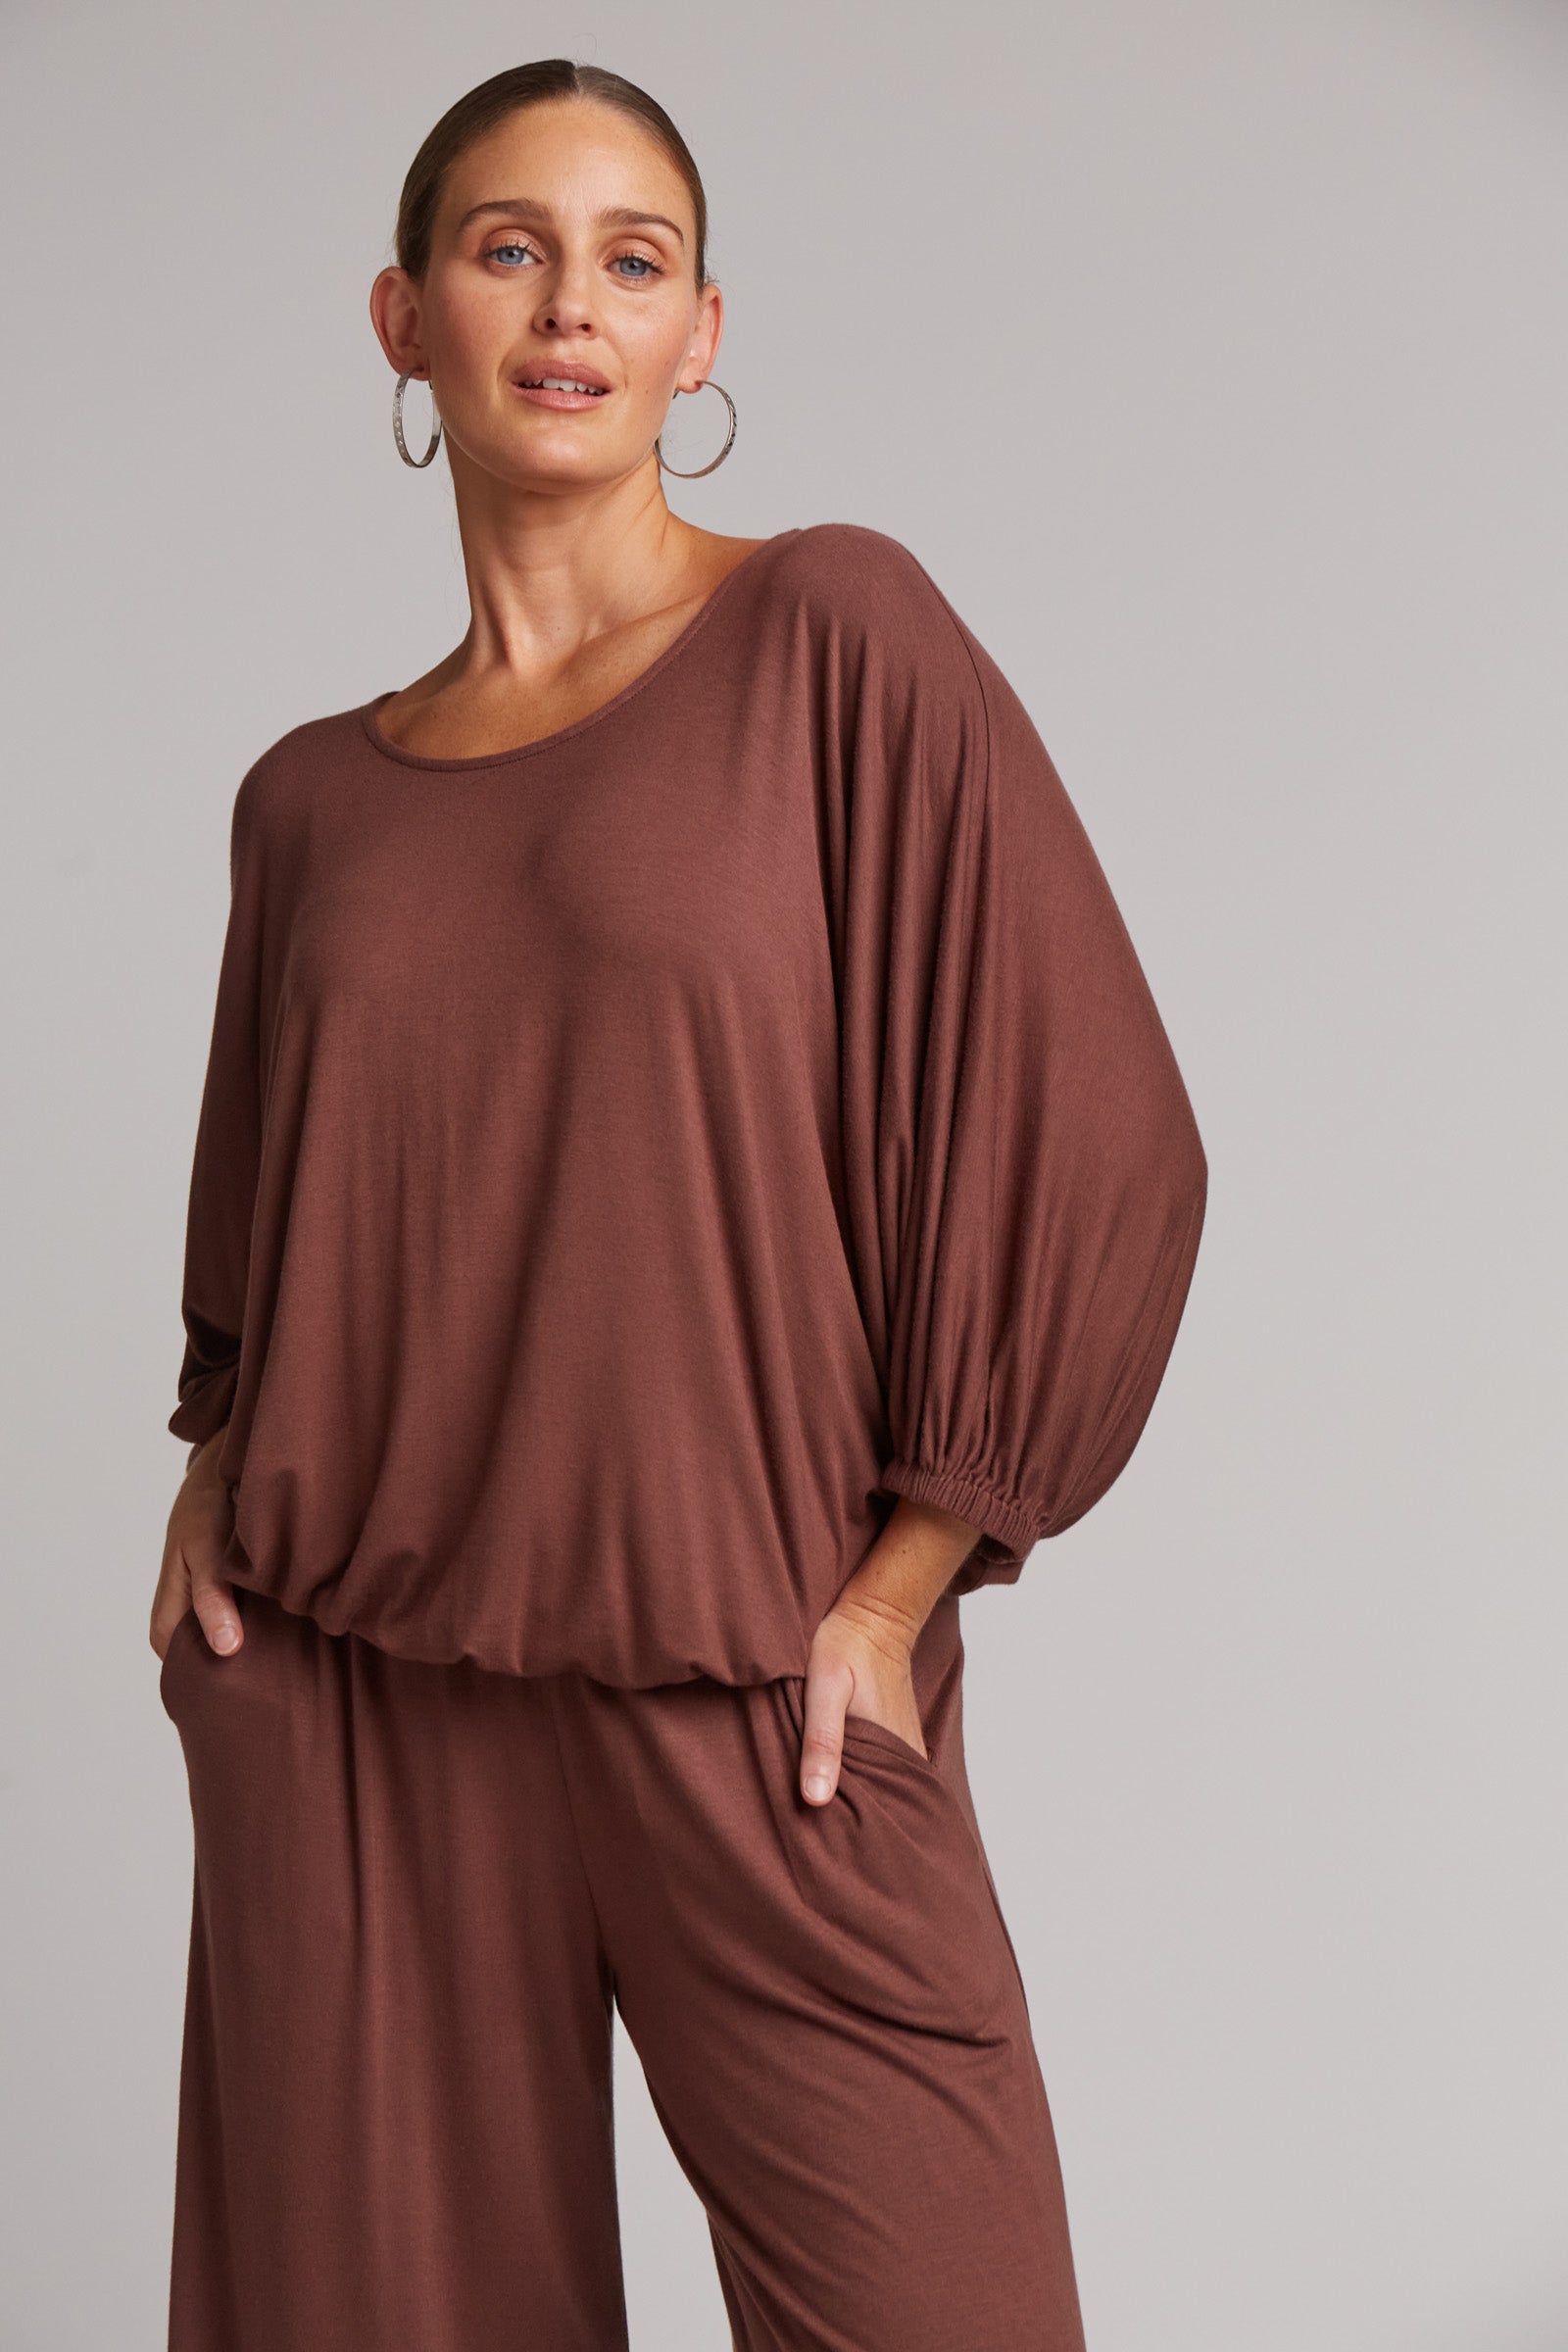 Studio Jersey Relaxed Top - Mocha - eb&ive Clothing - Top 3/4 Sleeve Jersey